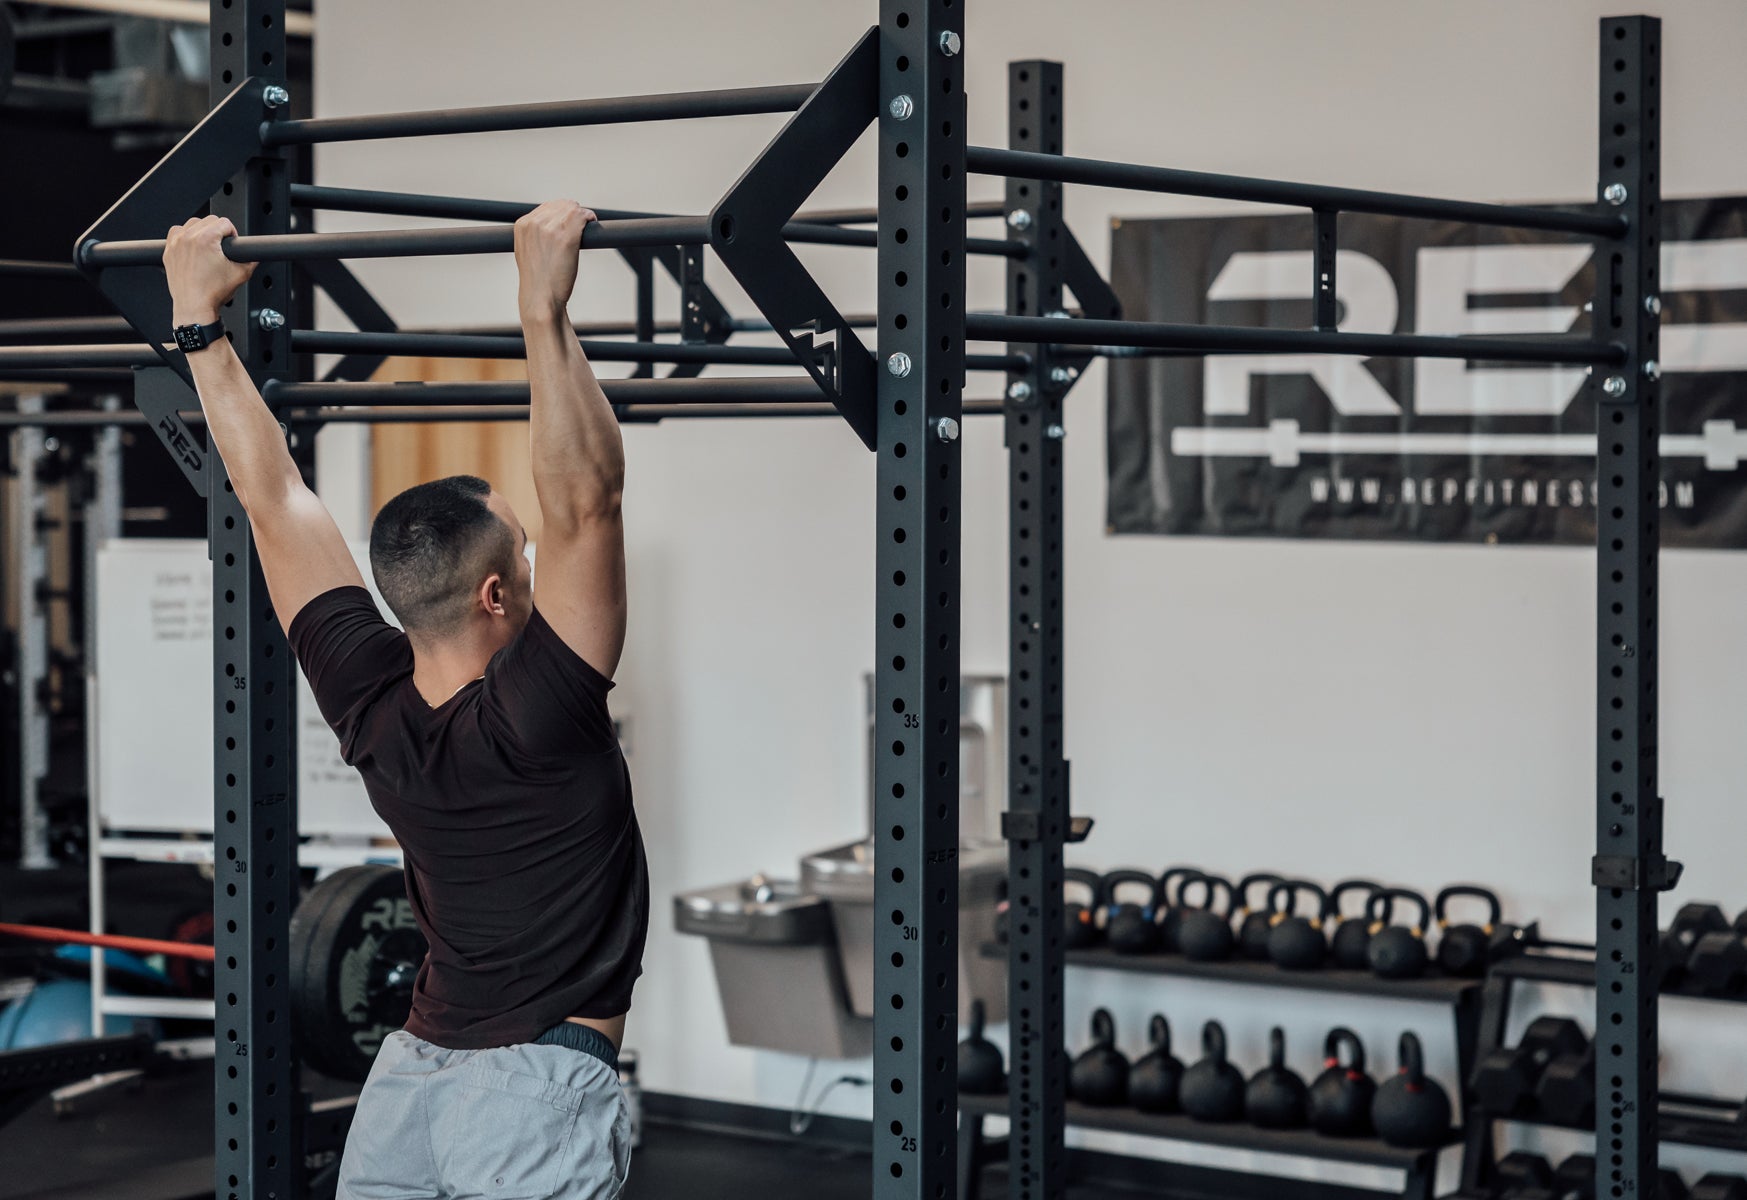 Rig with Tri-Bar Connector being used for kipping pull-ups